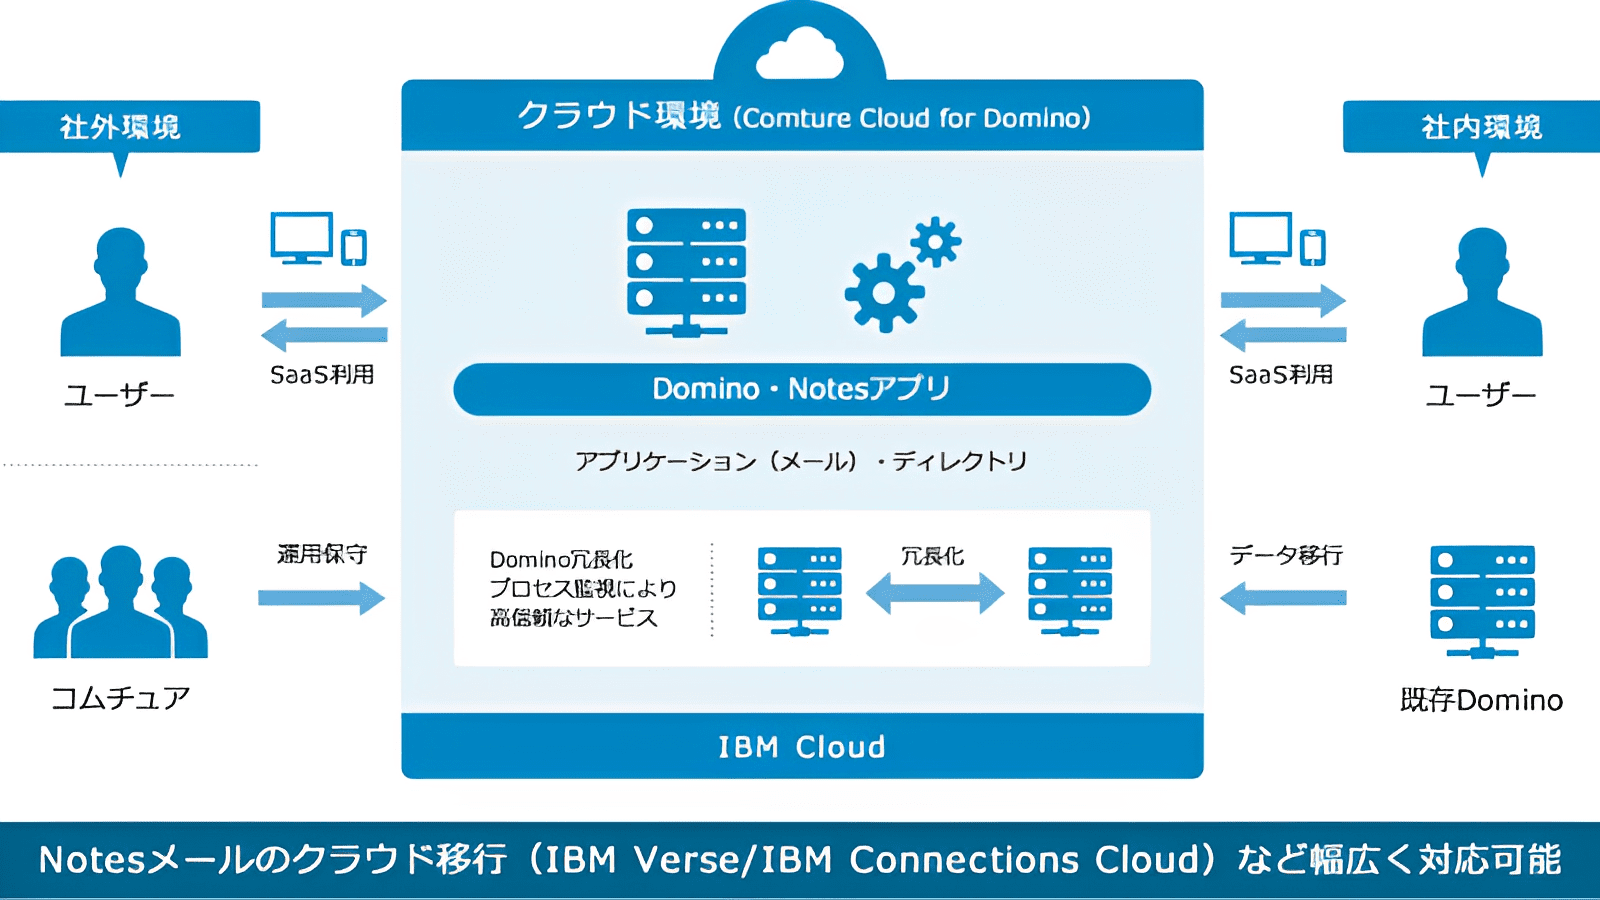 Comture Cloud for Domino概要